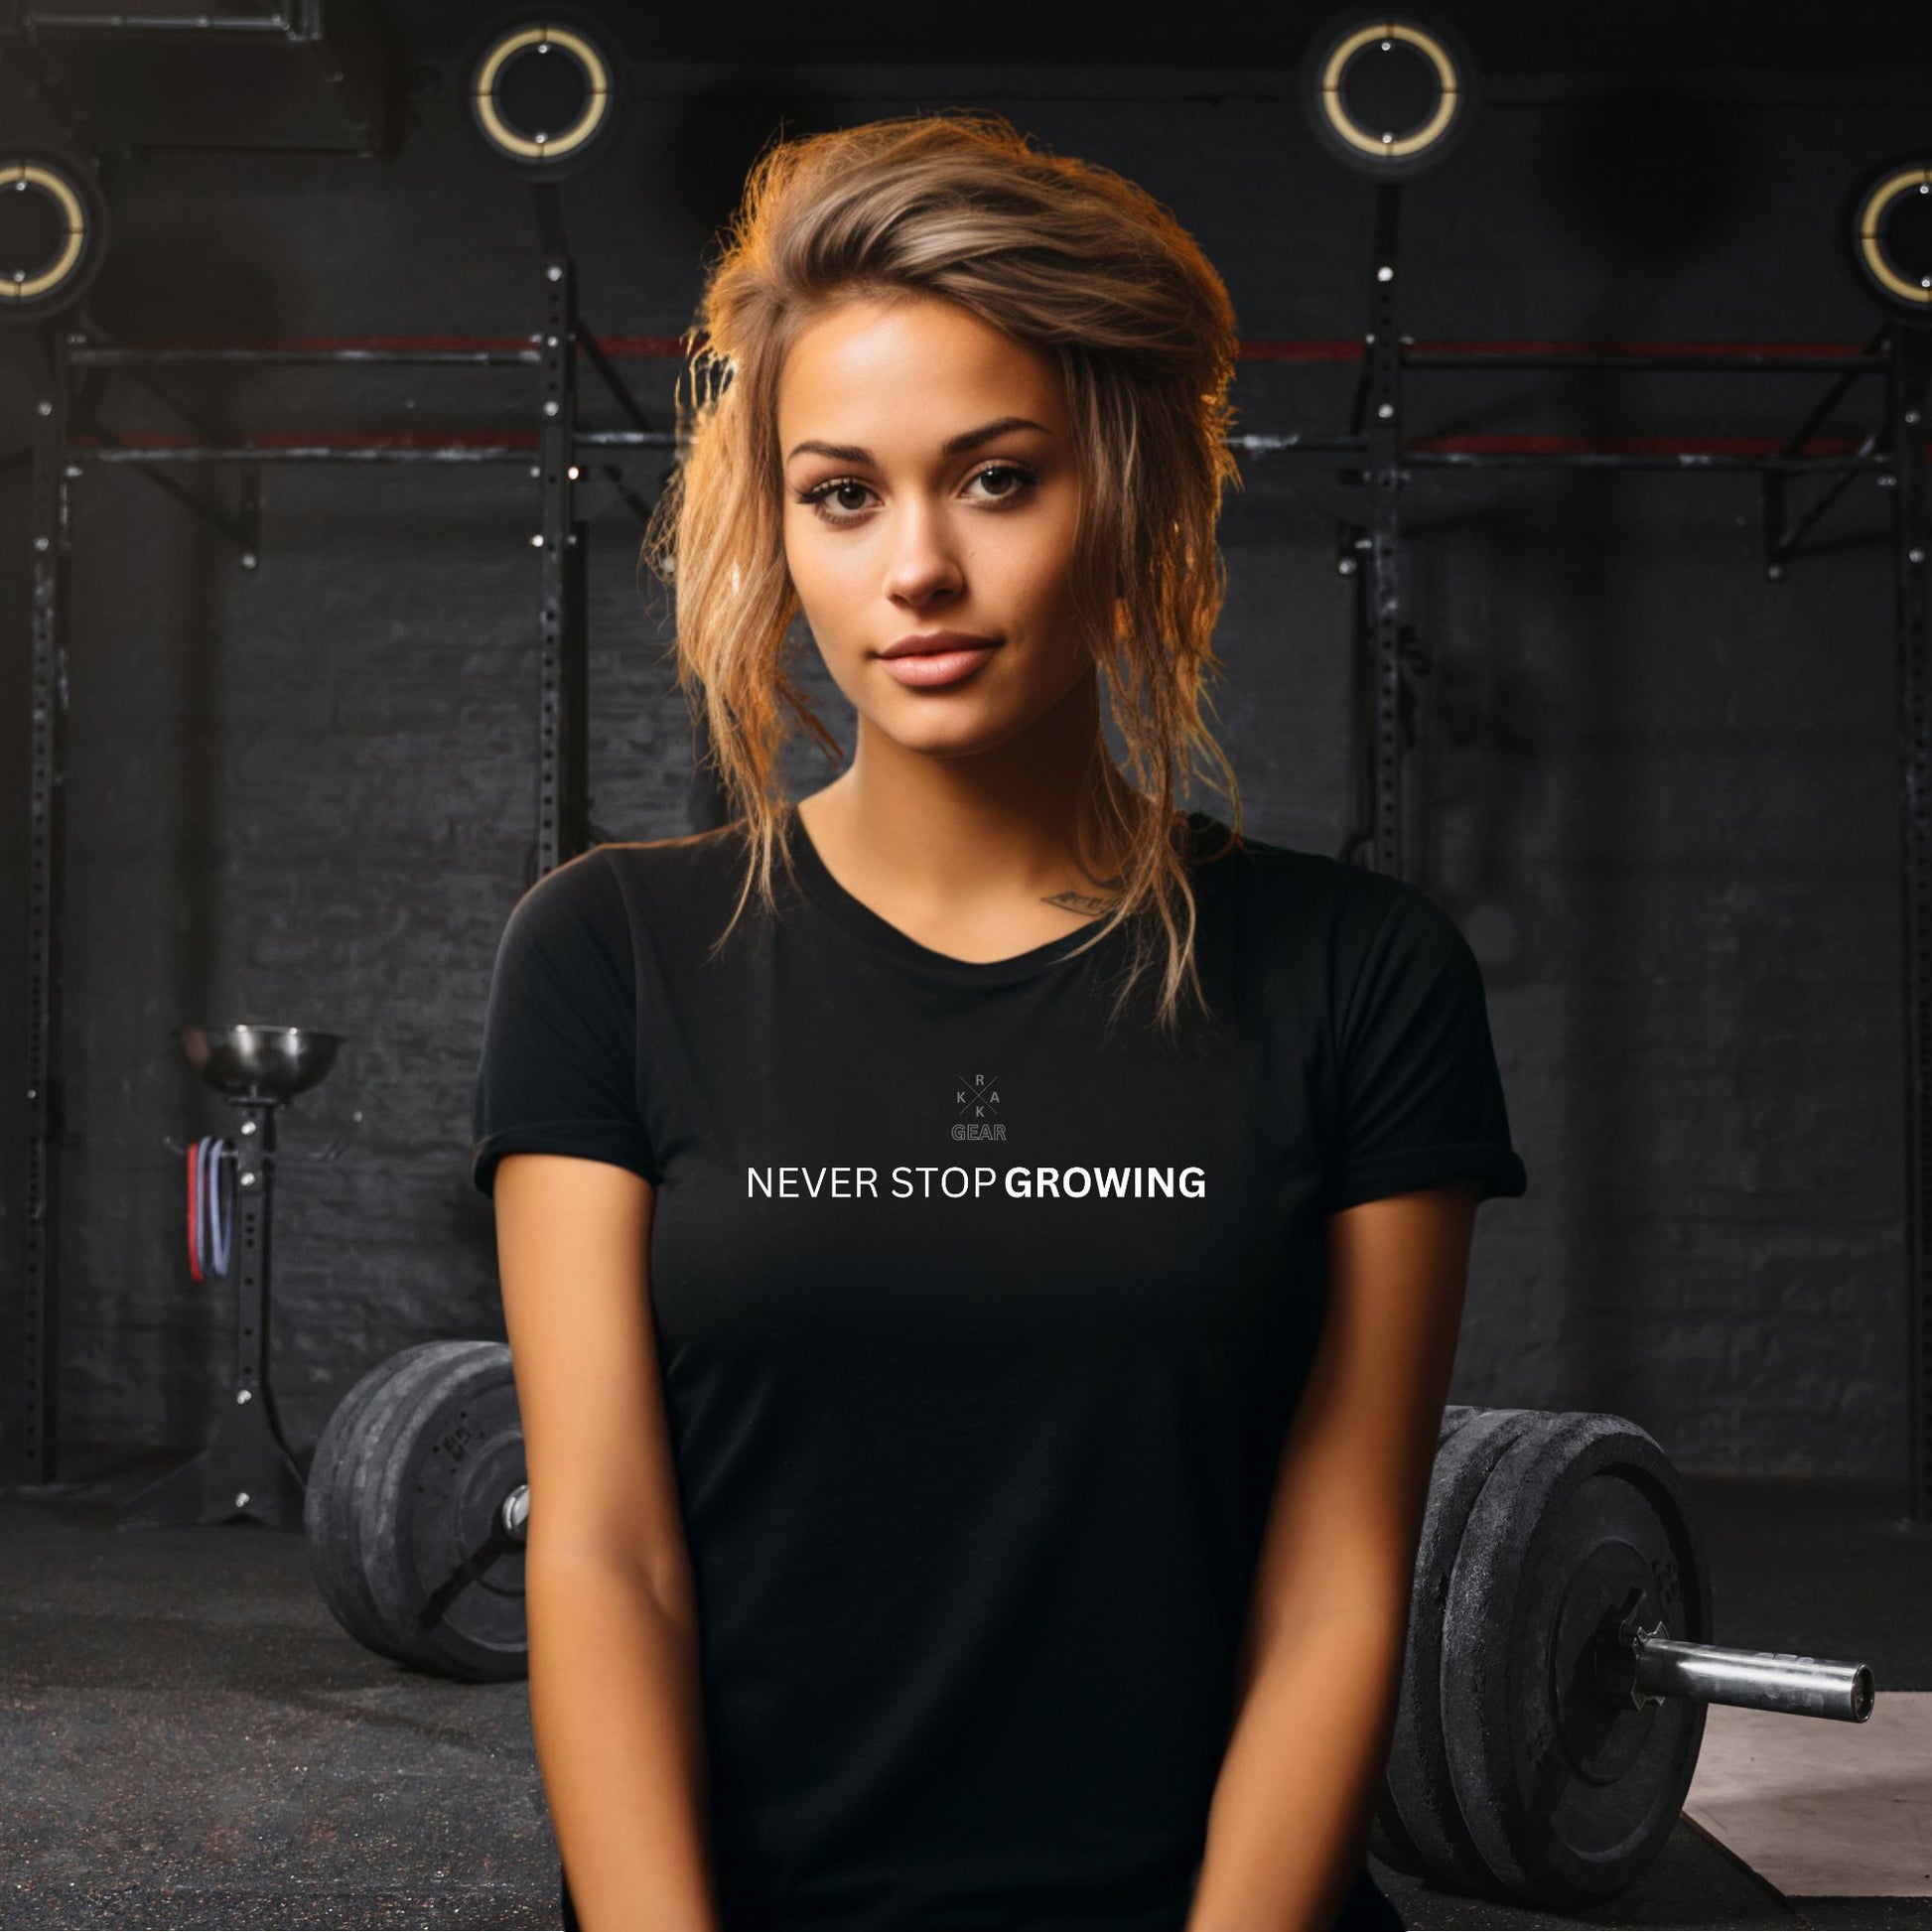 Rakkgear 'Never Stop Growing' Black T-Shirt – Embrace growth with the iconic Rakkgear X Logo and empowering slogan. Inner collar features the iconic Rakkgear Logo